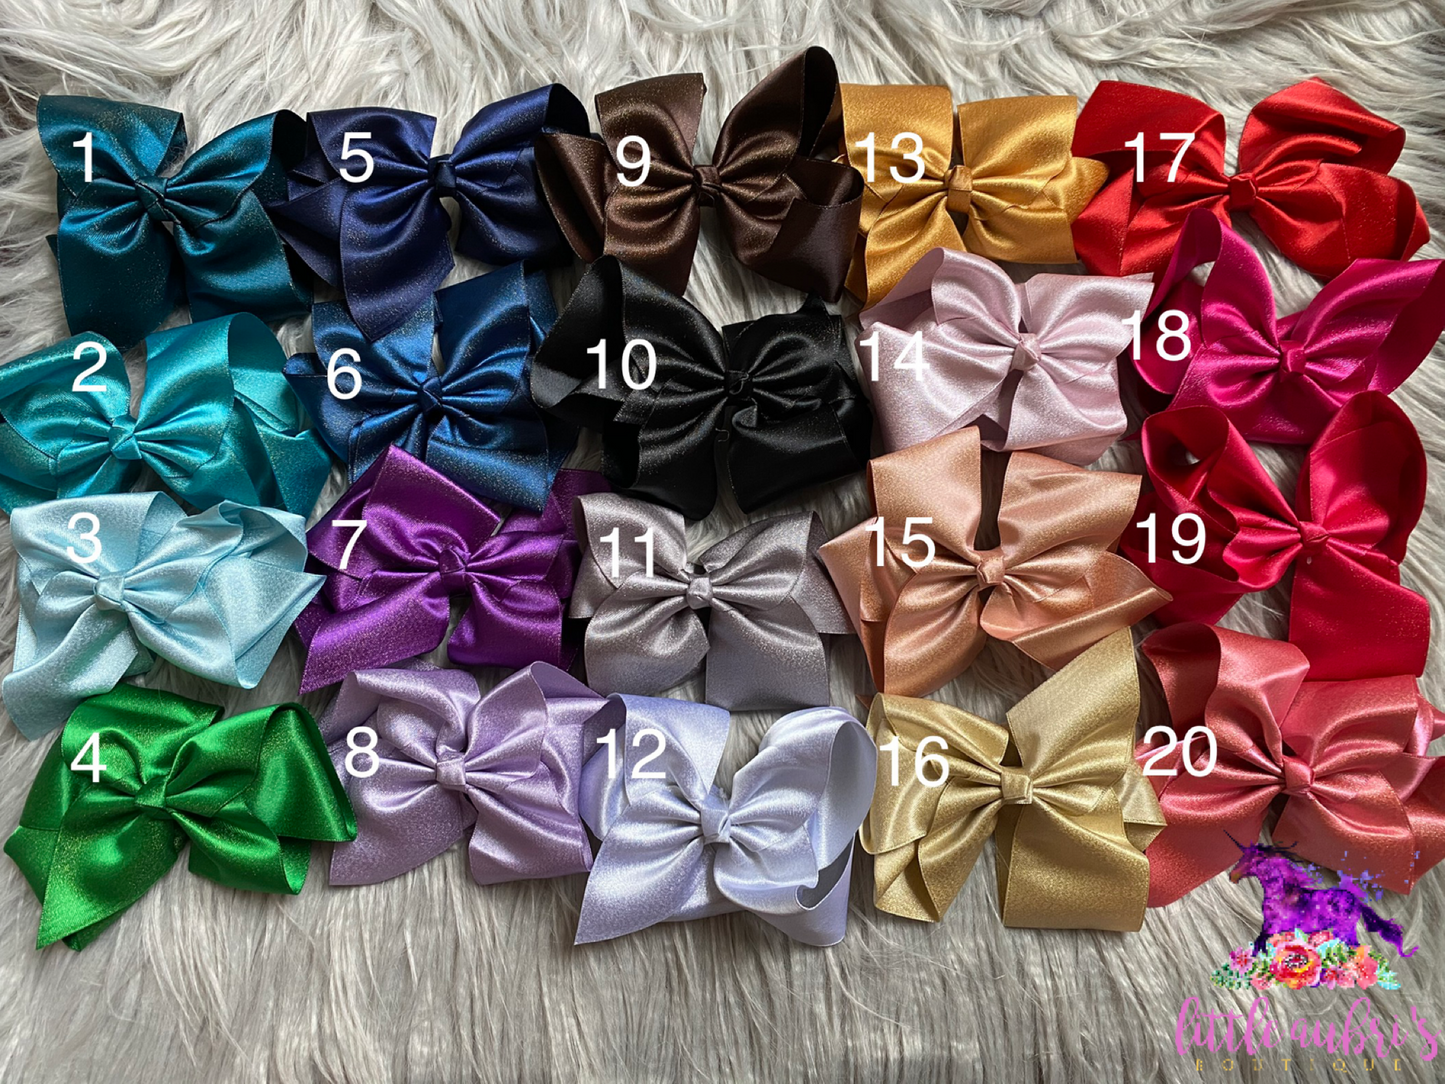 6 in. Shimmer Bow